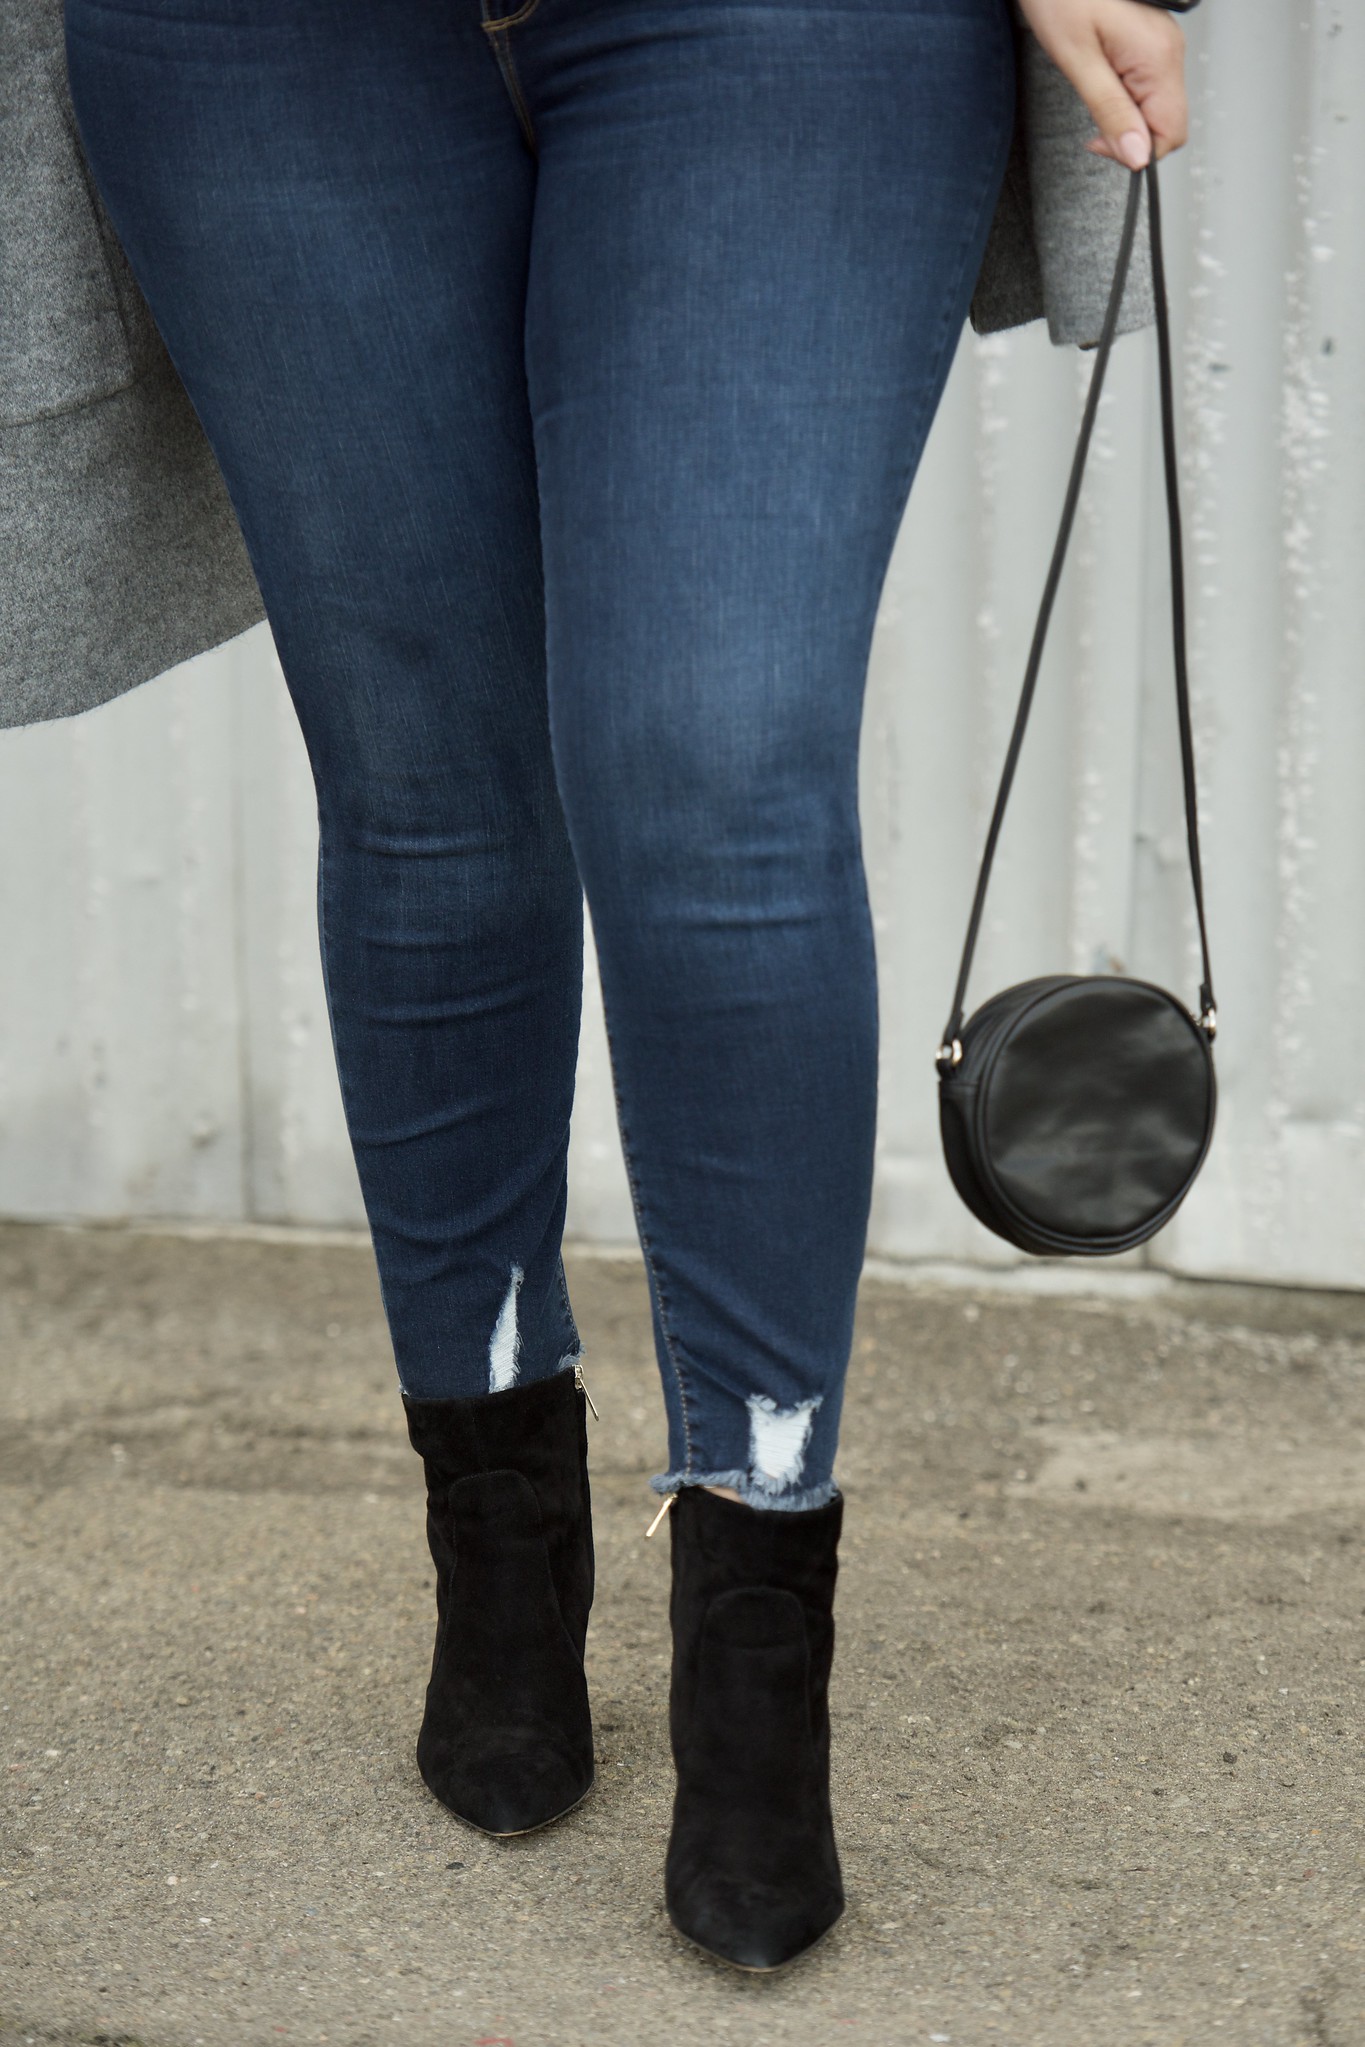 These are my Favorite Jeans Under $25 via Girl With Curves #skinnyjeans #jeans #walmart #budget #fashion #style #plussize #blogger